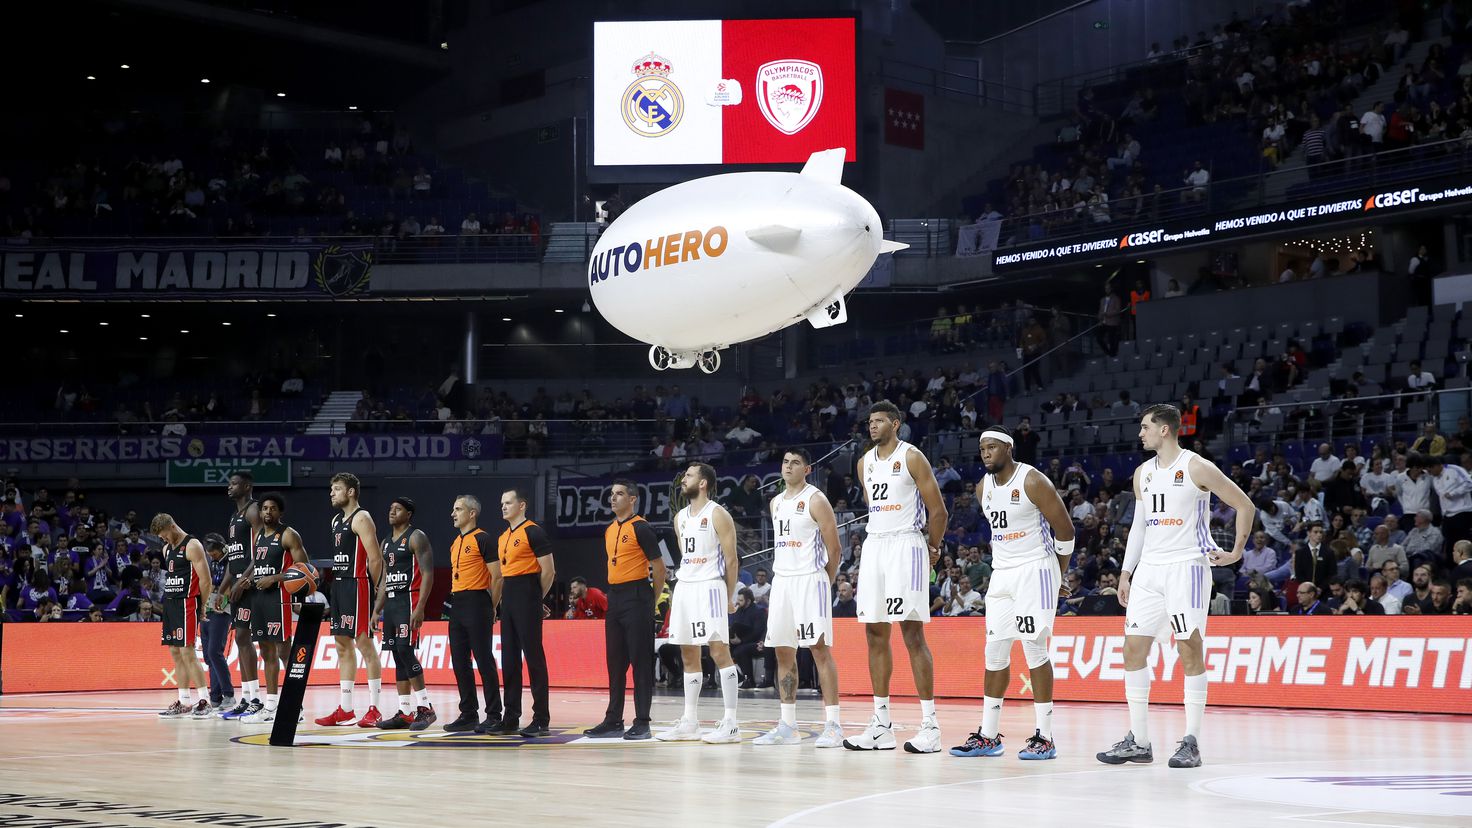 Olympiacos wants Real Madrid in the Final Four
